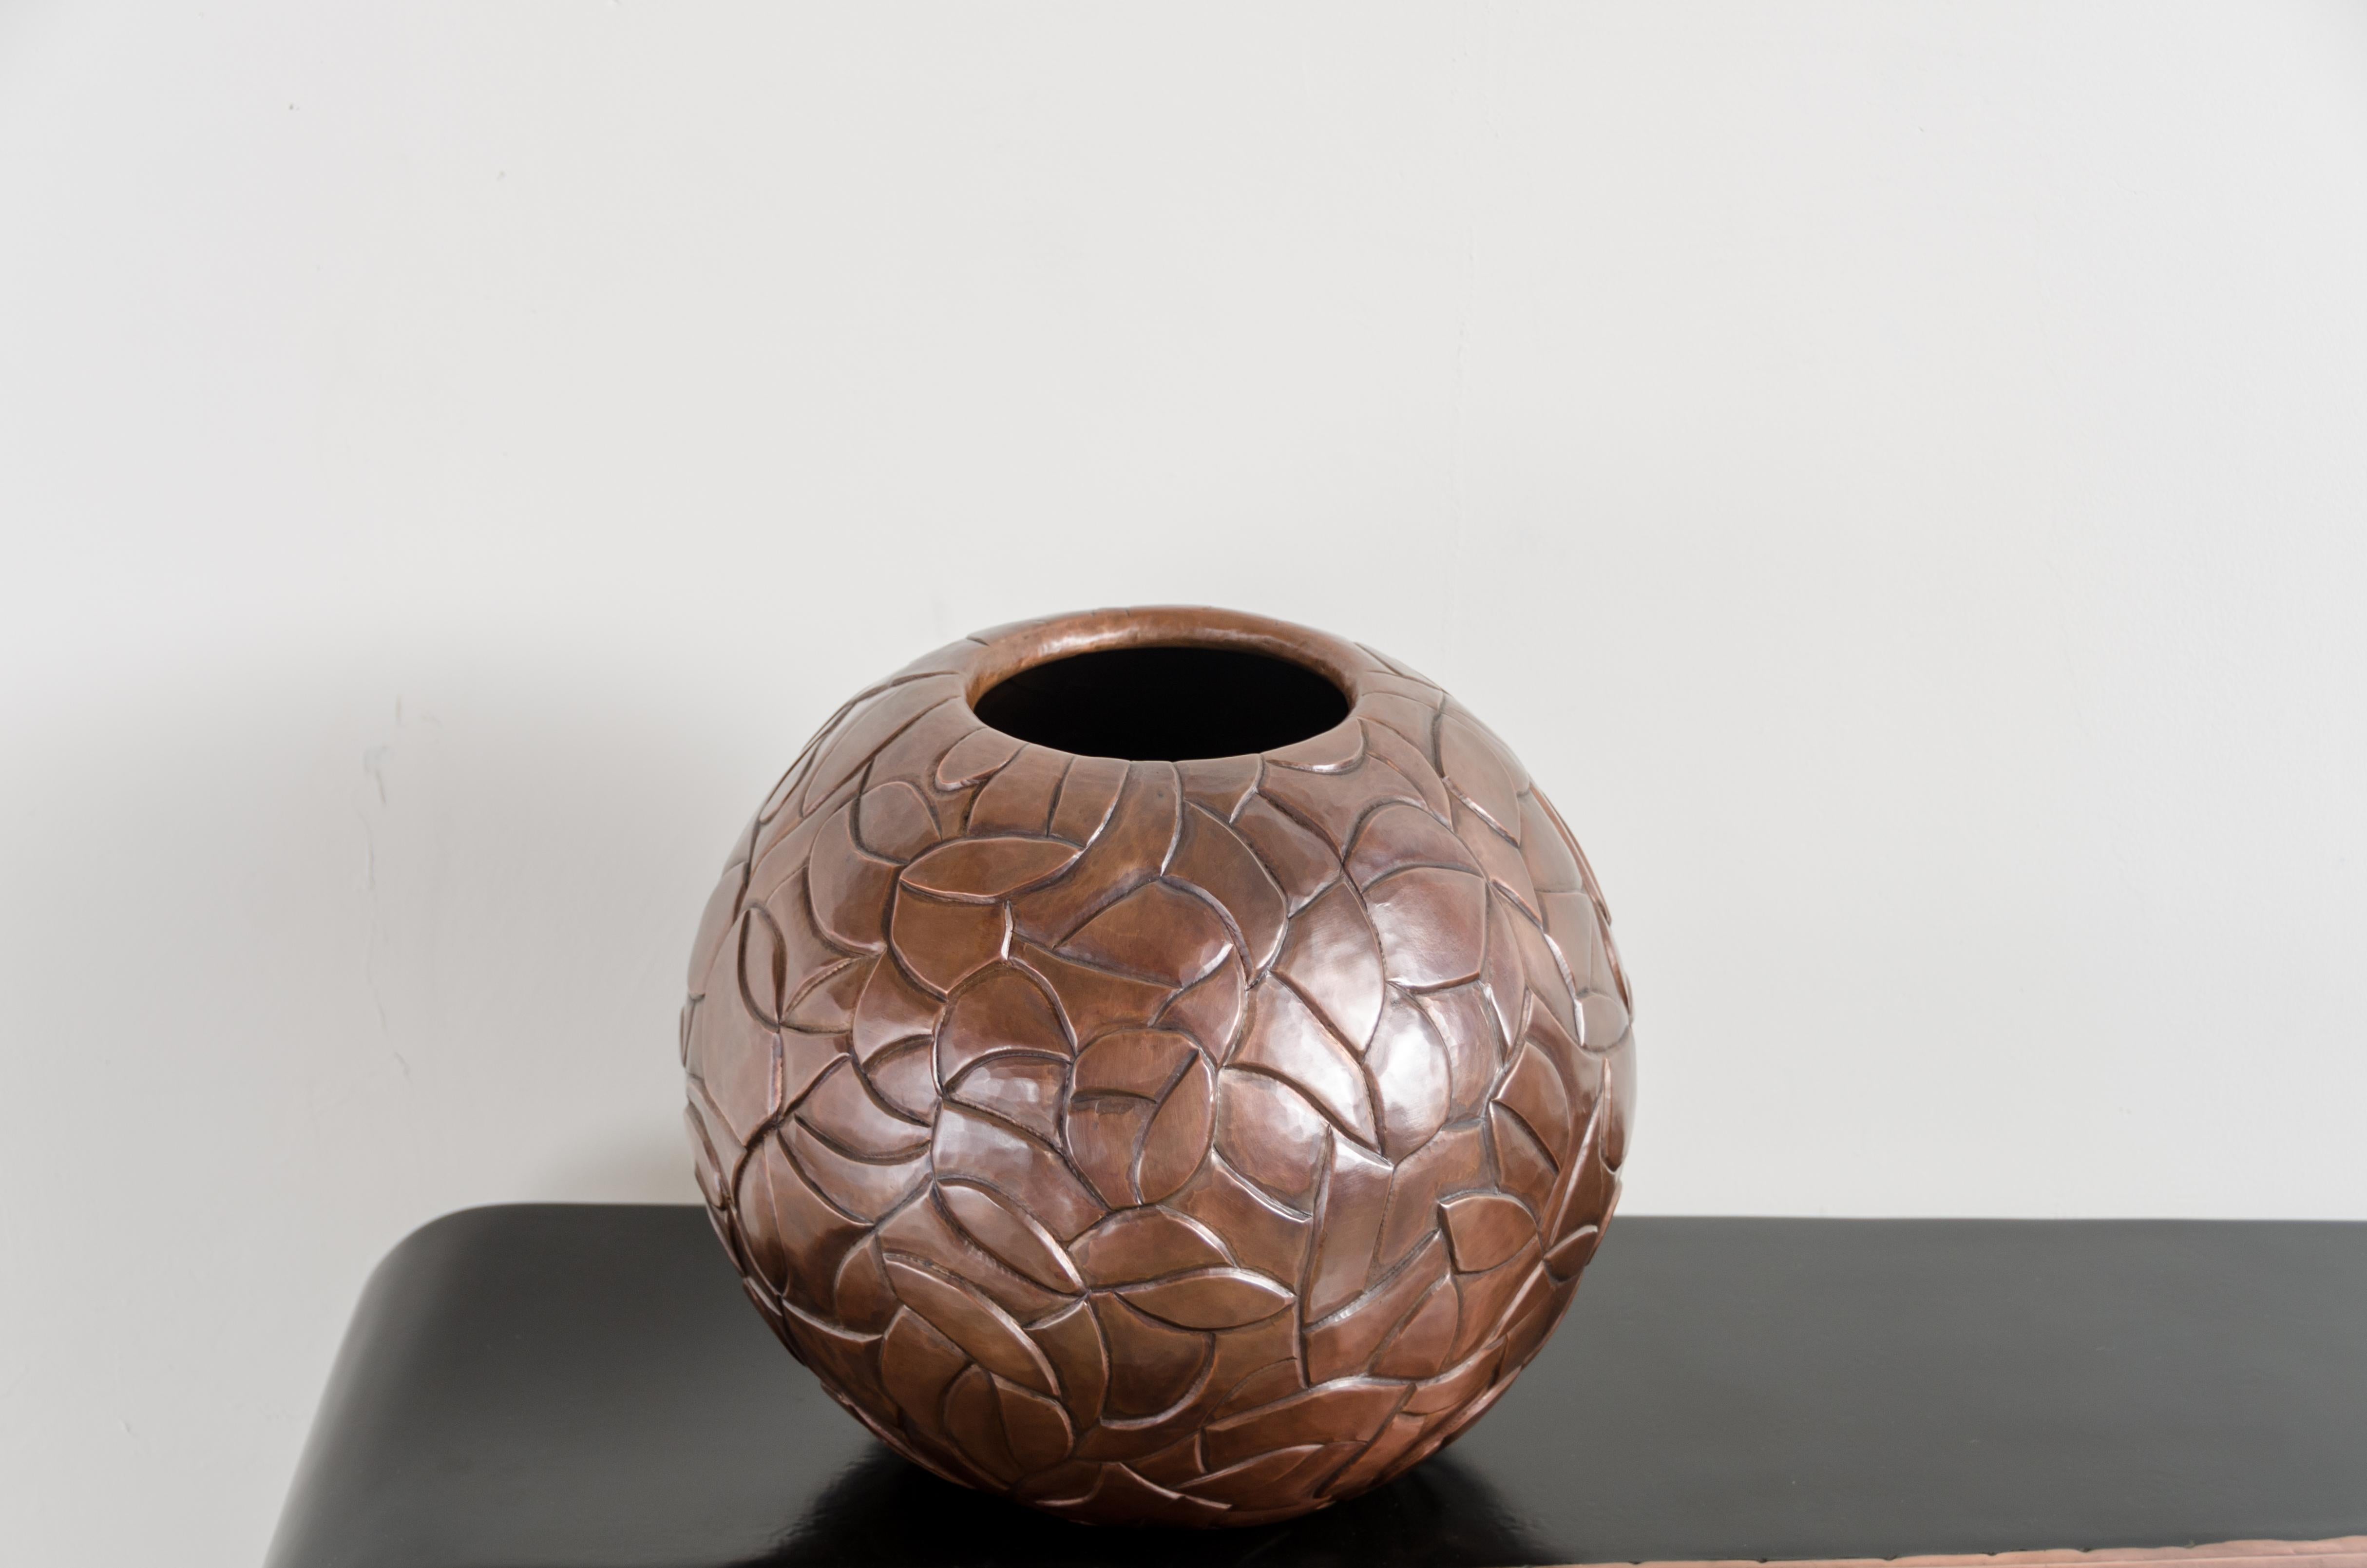 Moon Jar w/ Chuan Design 
Antique Copper
Hand Repousse
Limited Edition

Repoussé is the traditional art of hand-hammering decorative relief onto sheet metal. The technique originated around 800 BC between Asia and Europe and in Chinese